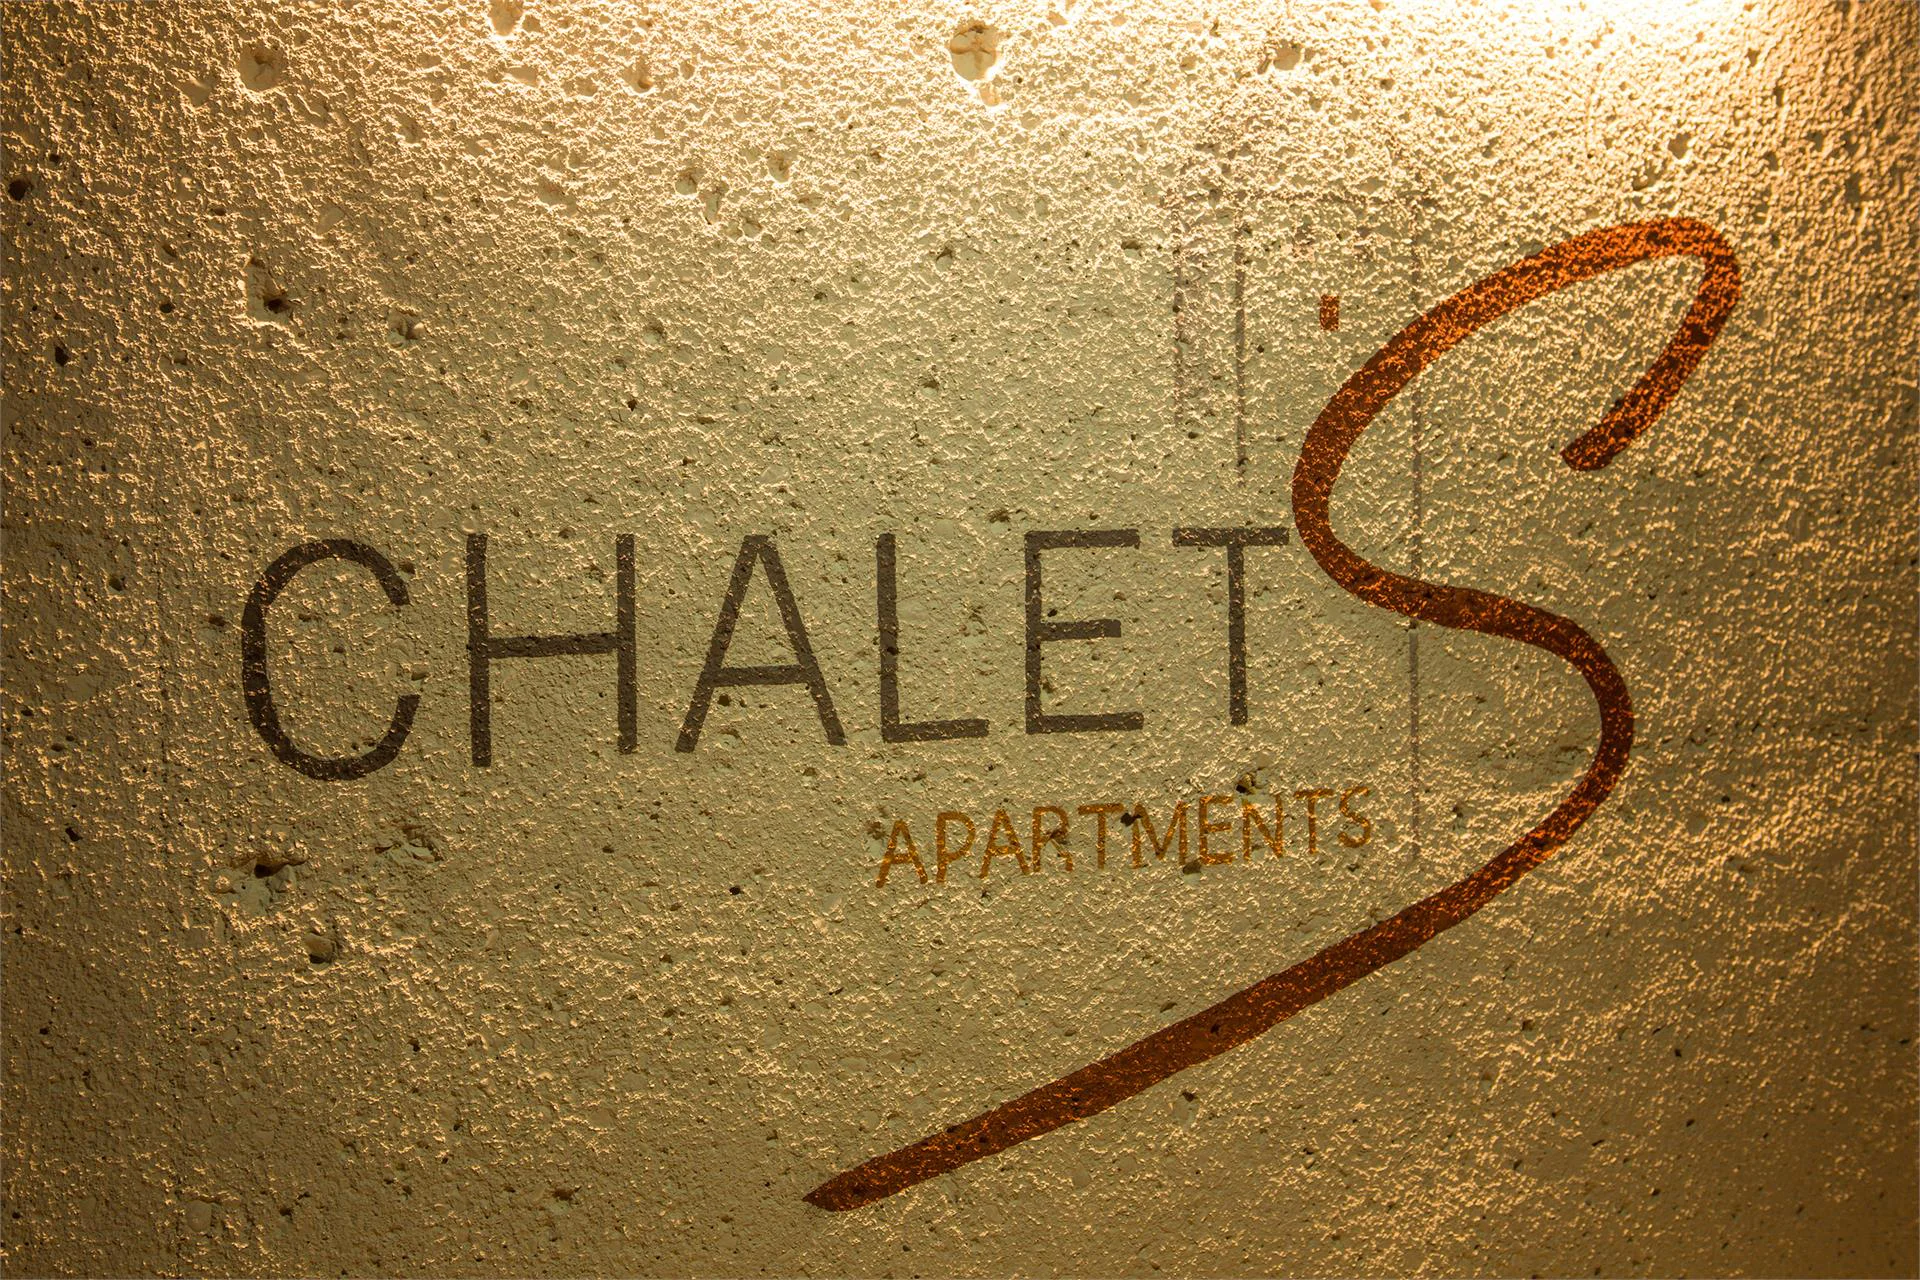 Chalet S Apartments Sand in Taufers/Campo Tures 11 suedtirol.info